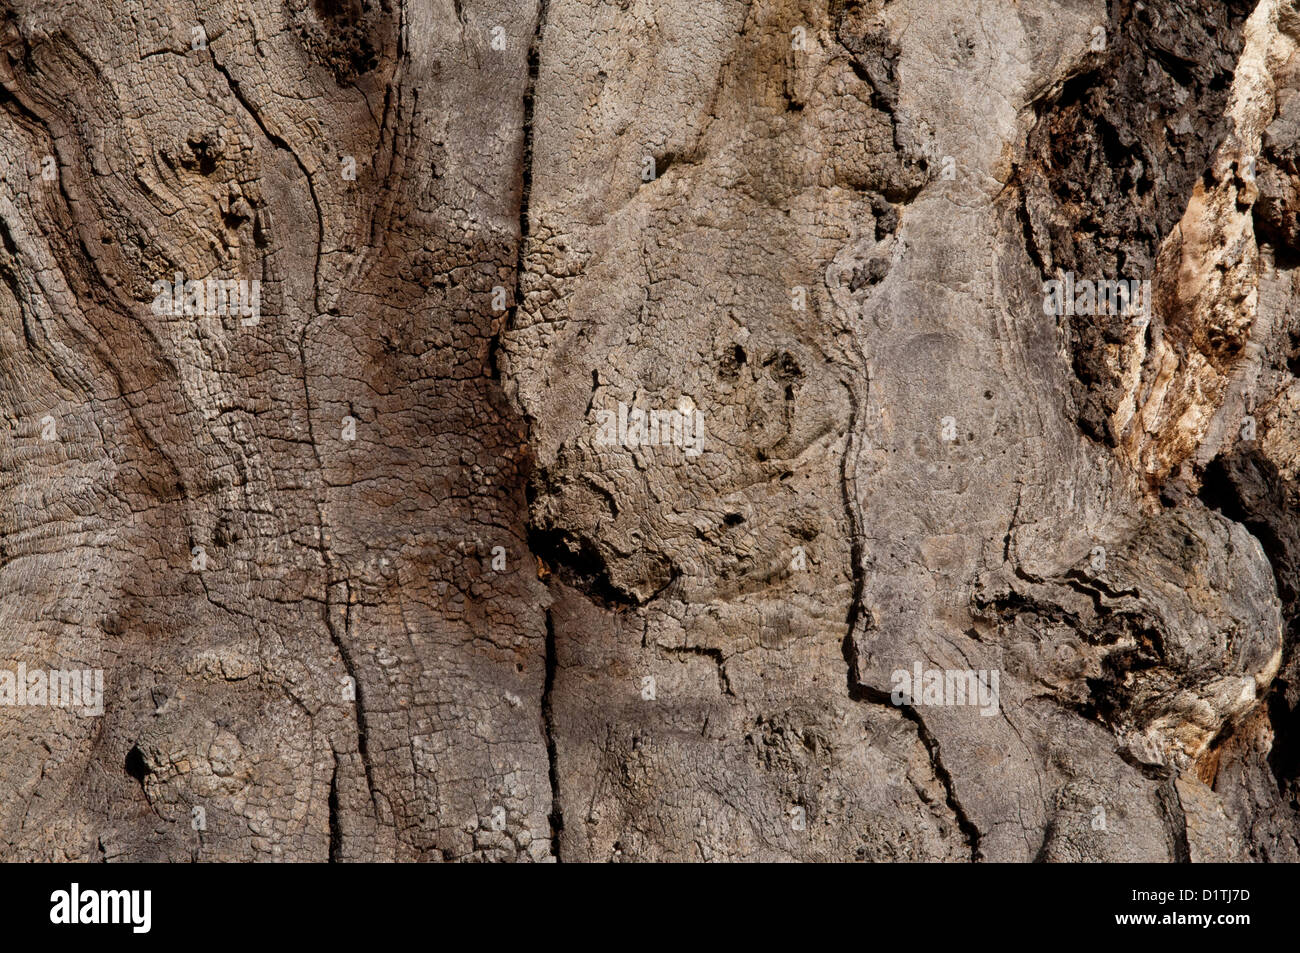 Close up showing texture of Oak bark Stock Photo